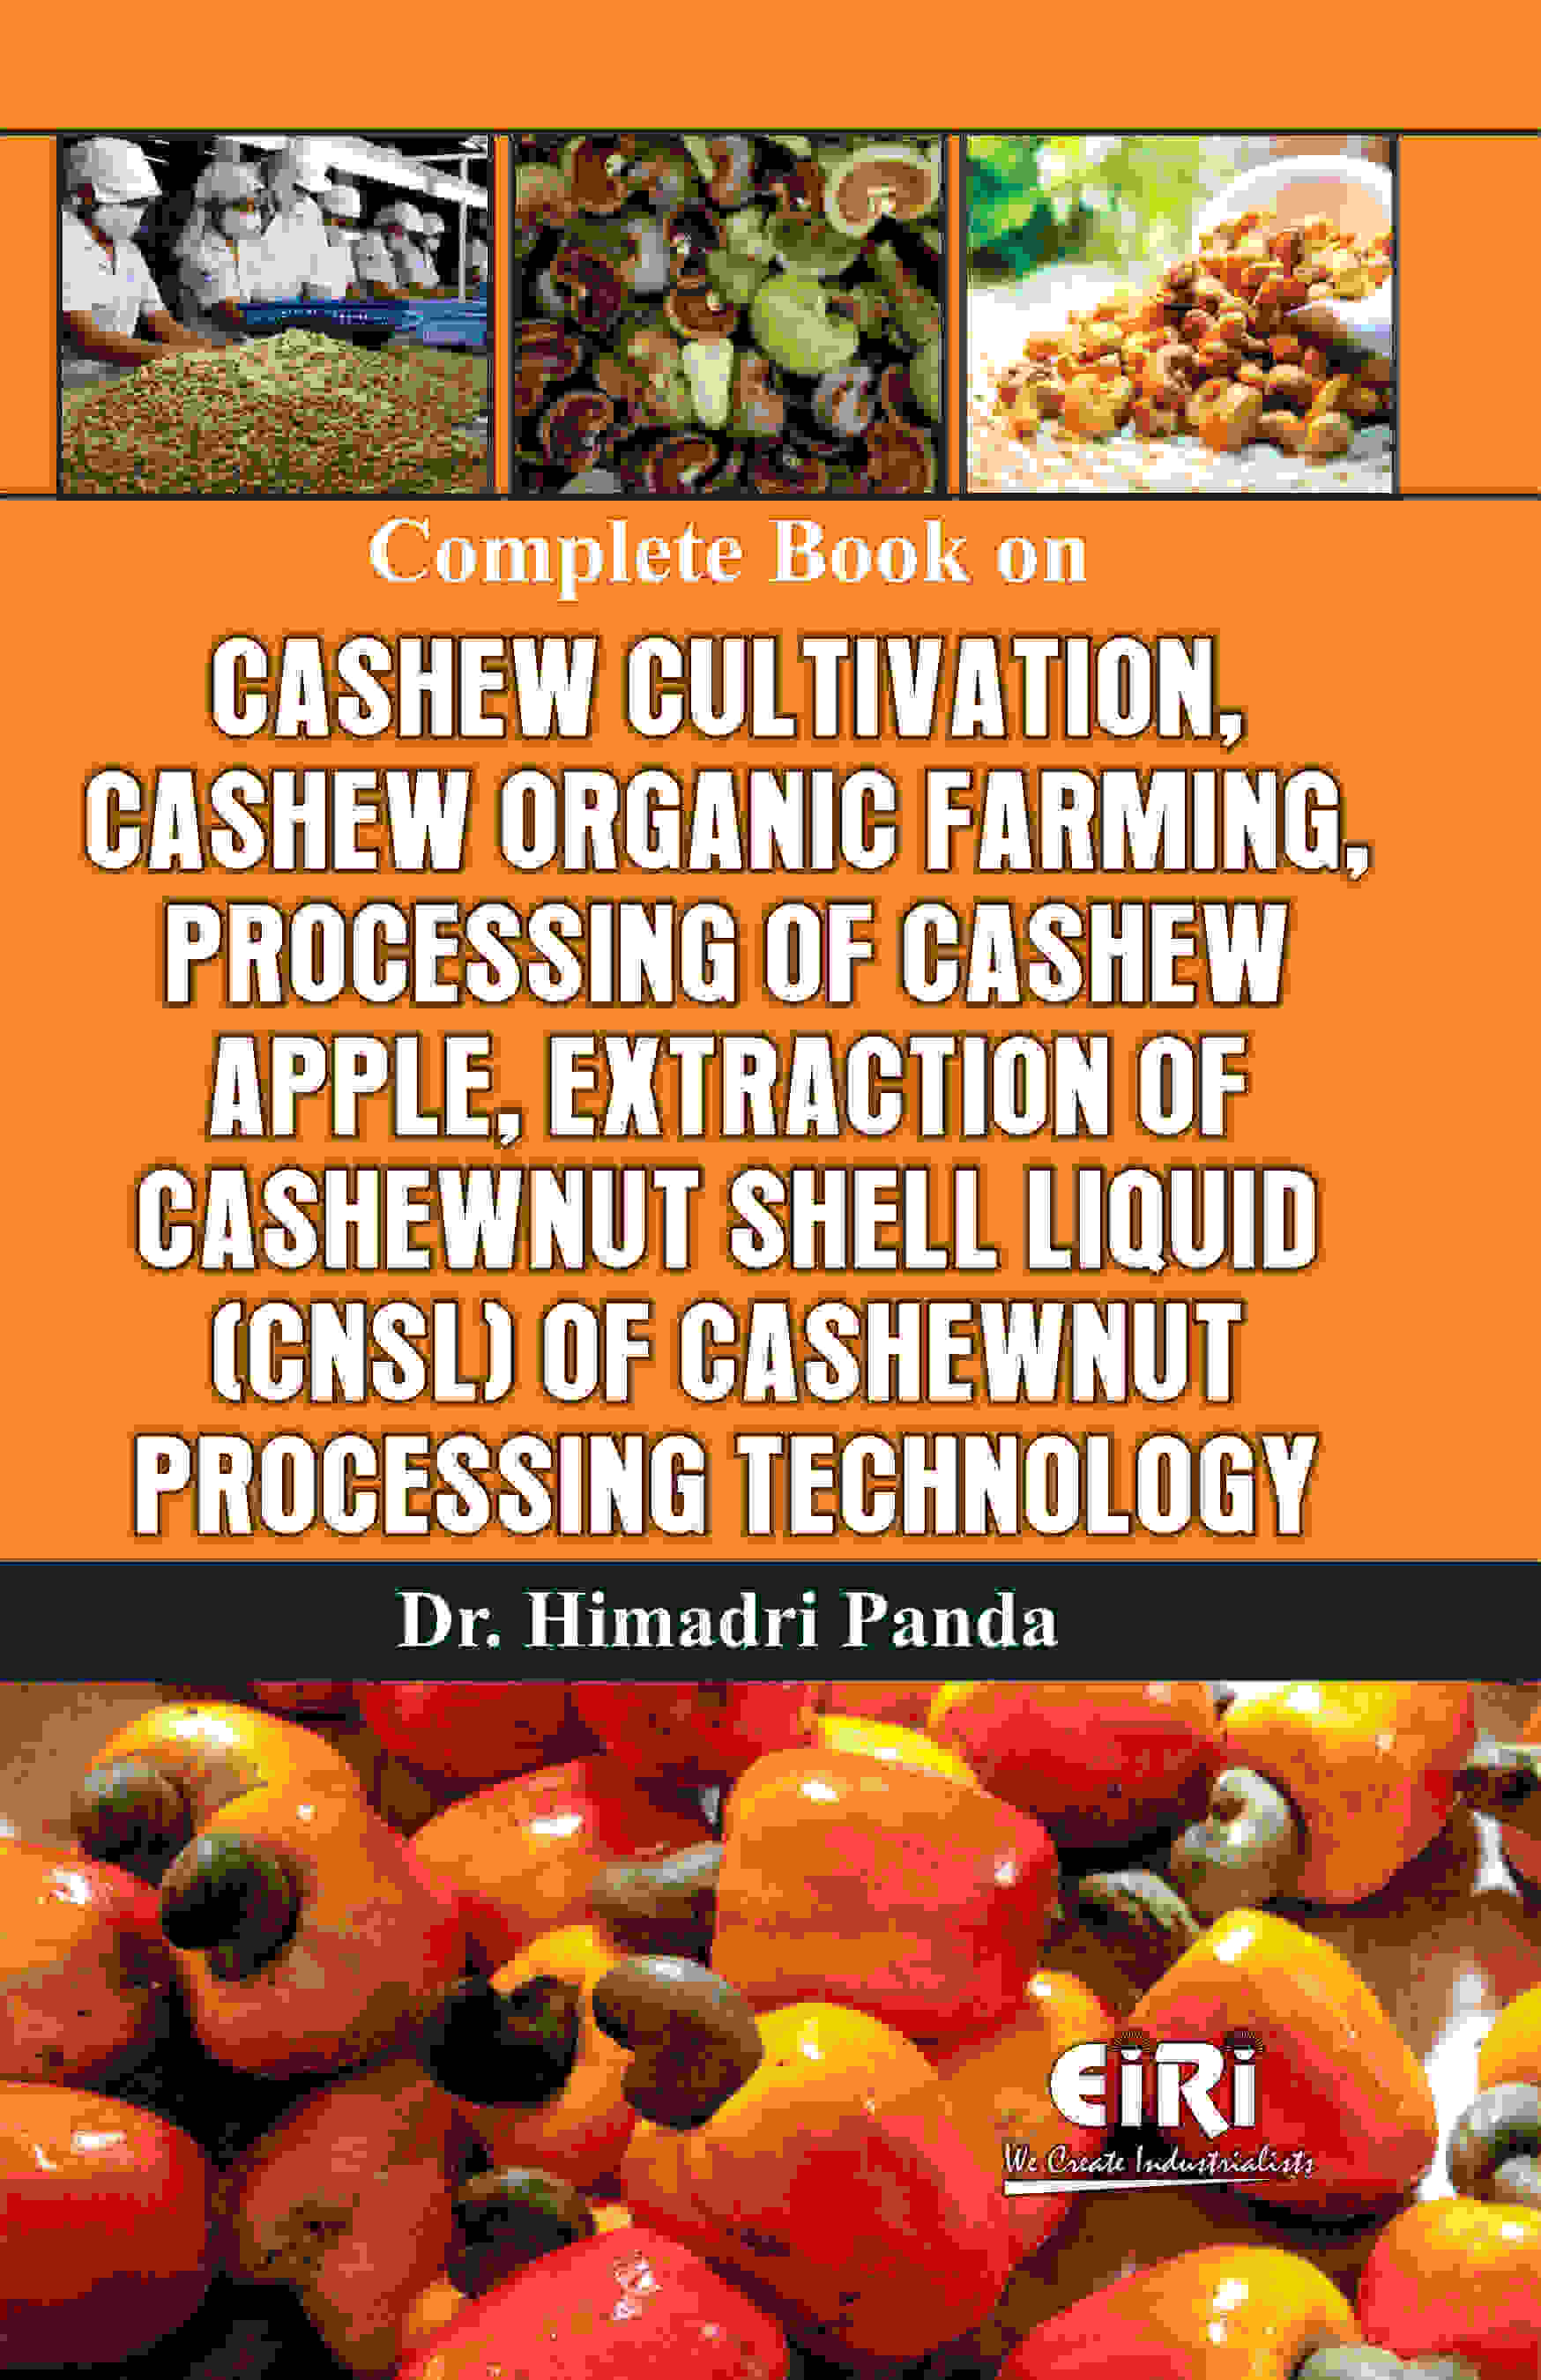 complete book on cashew cultivation, cashew organic farming, processing of cashew apple, extraction of cashewnut shell liquid (cnsl) of cashewnut processing technology